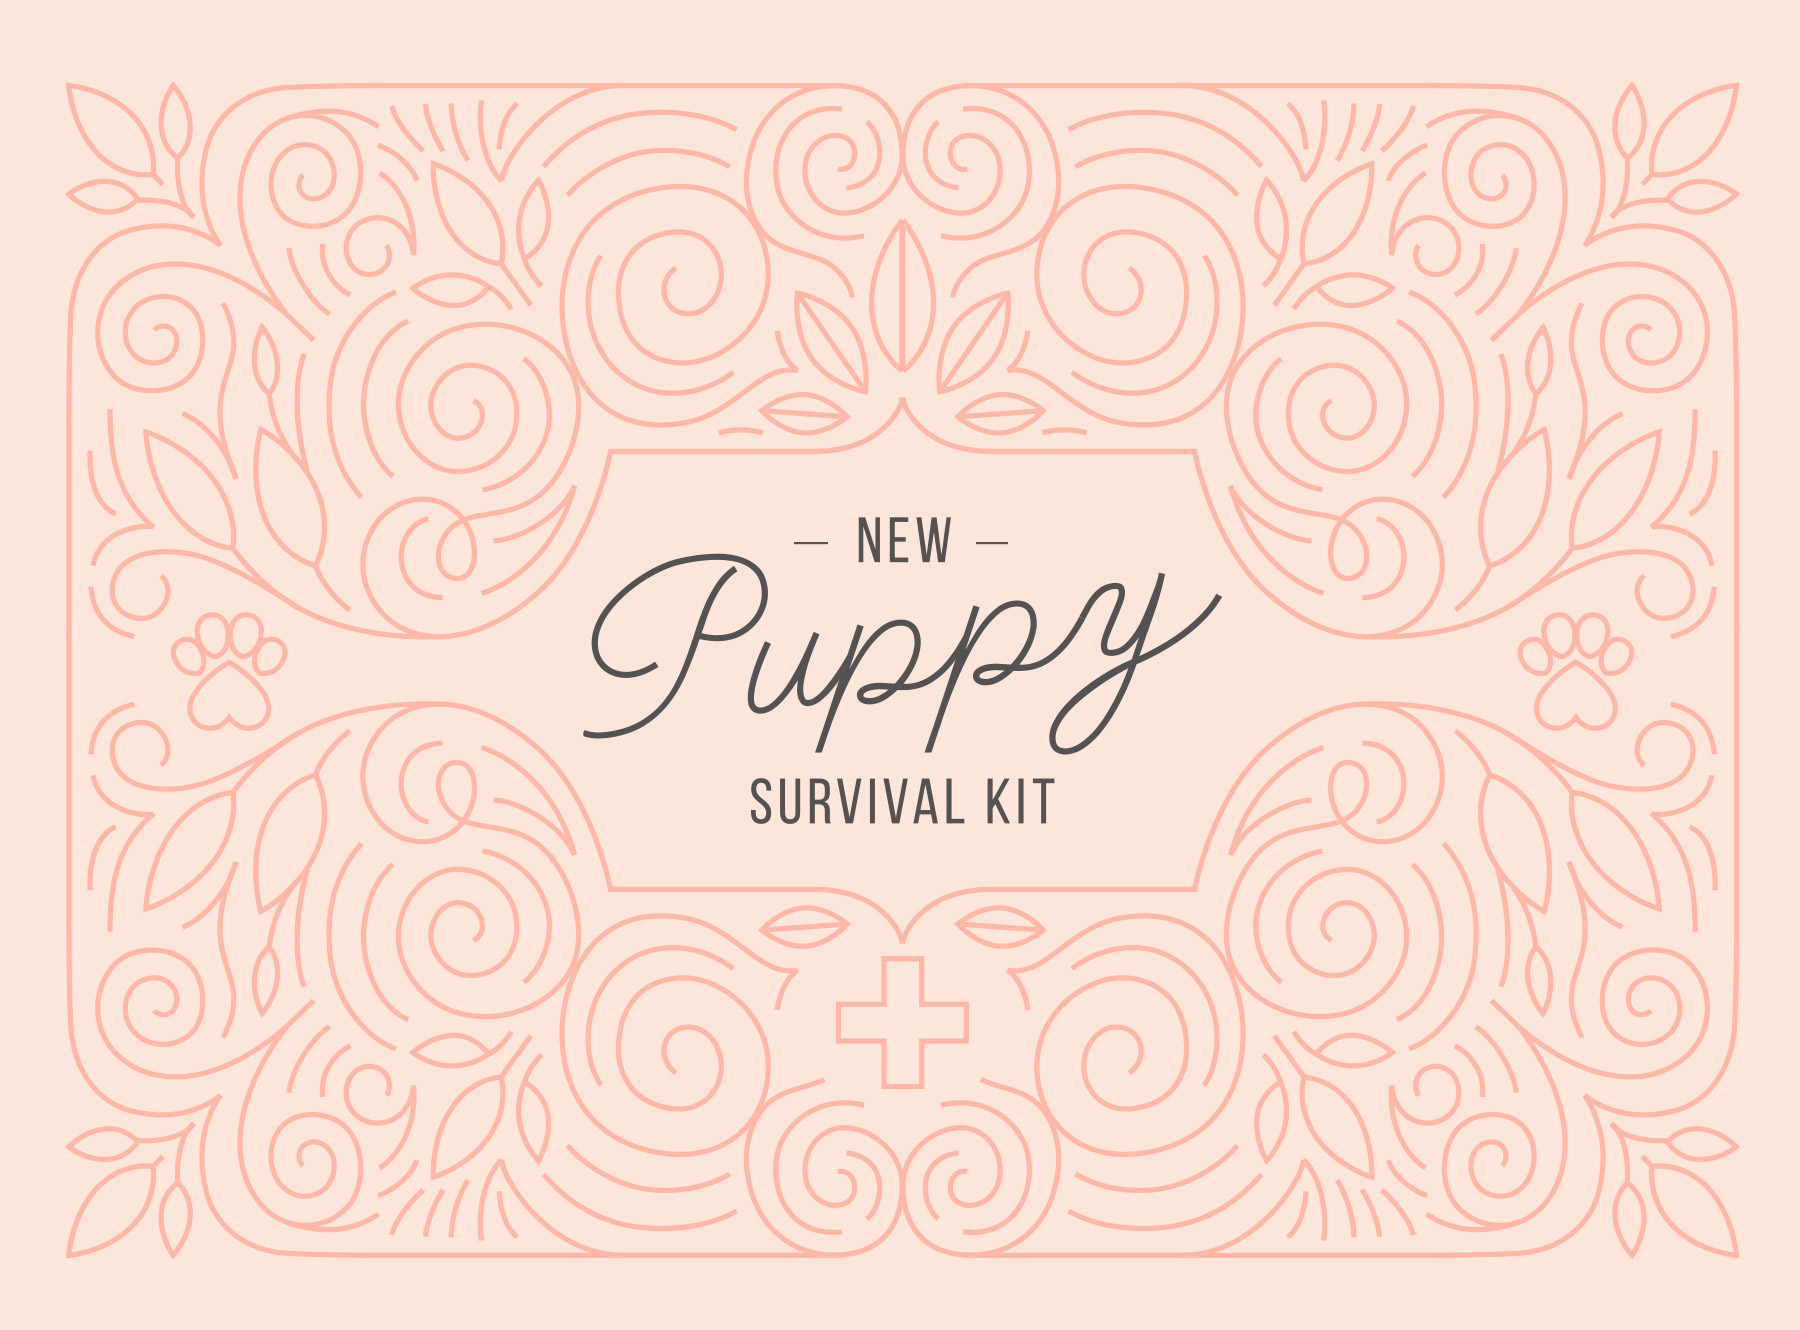 The puppy survival kit